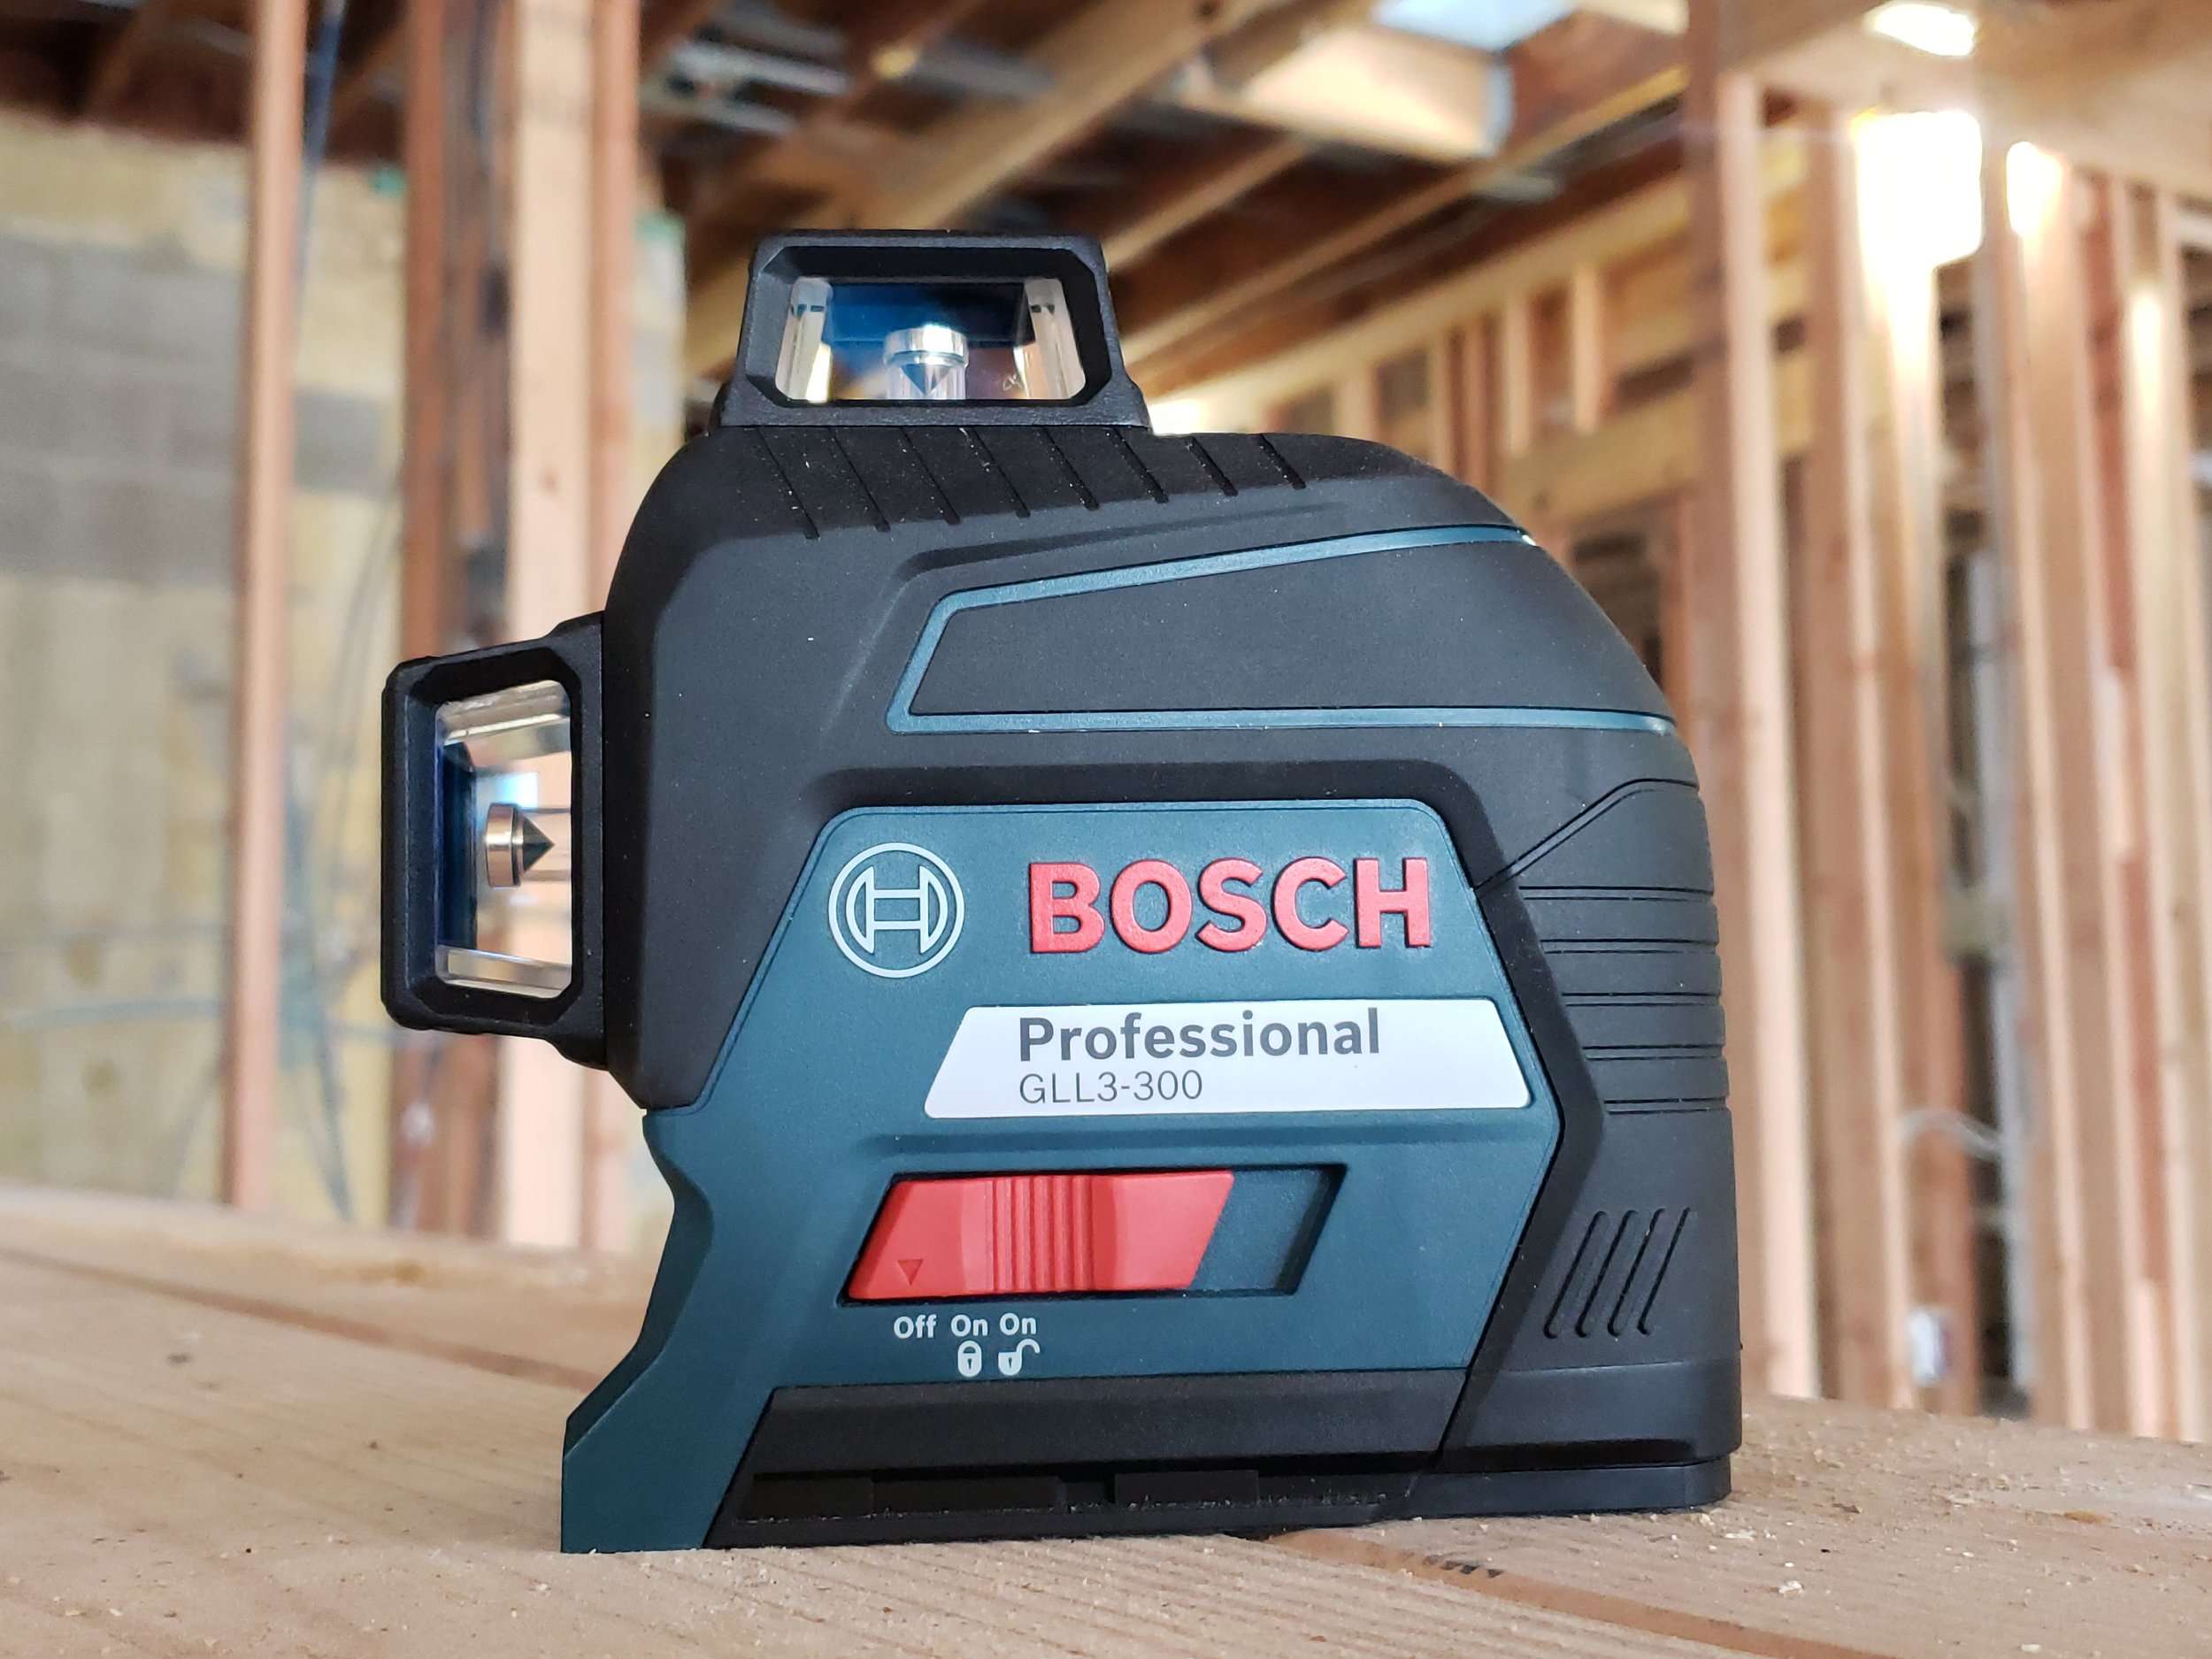 How To Use A Bosch Laser Level